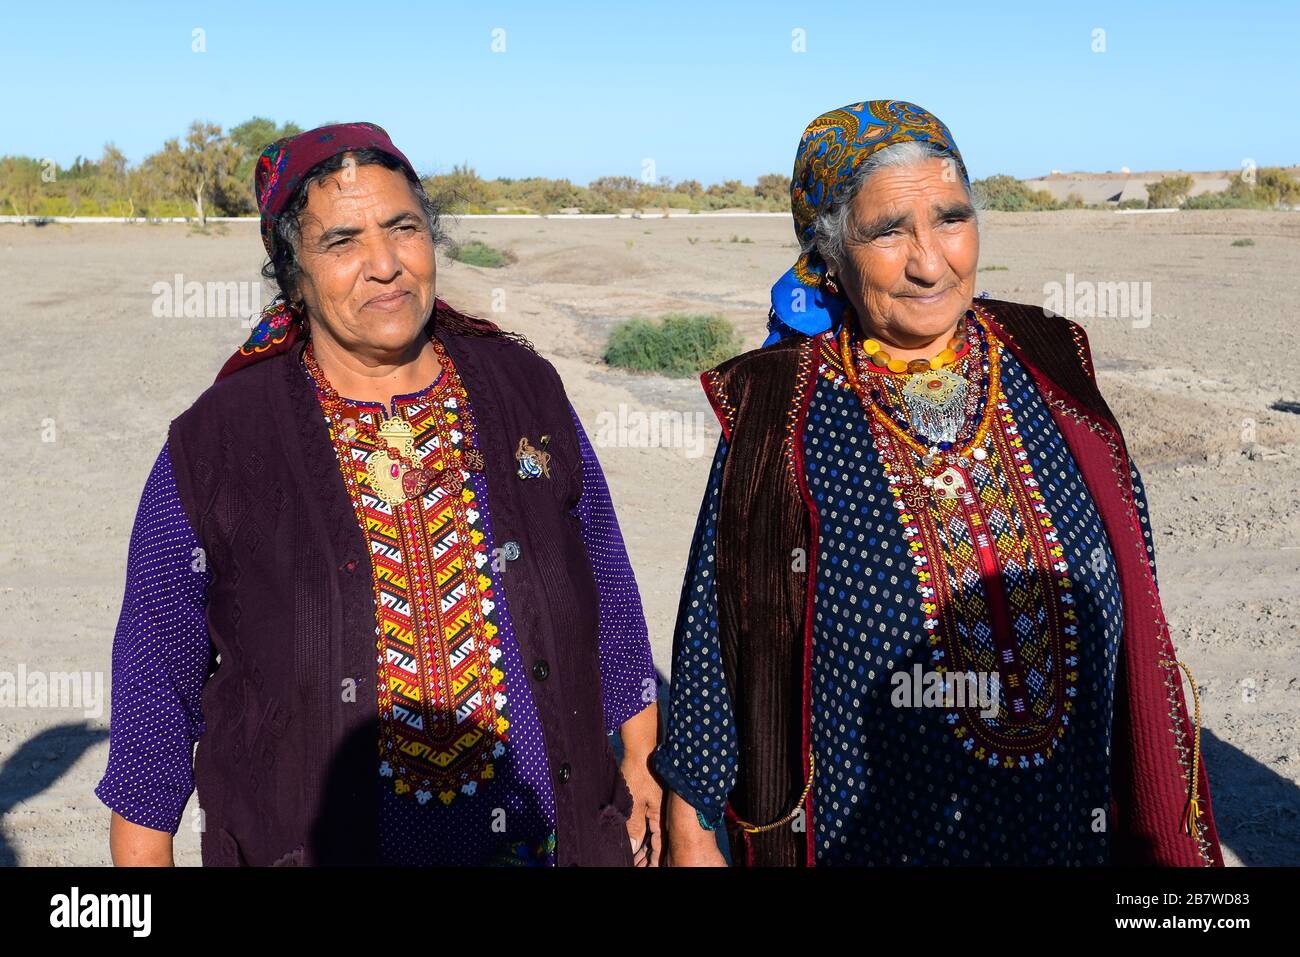 Two posing old woman wearing traditional clothes for rural area in Central Asia in Kunya Urgench, Turkmenistan. Colorful Turkmen robe and scarf. Stock Photo